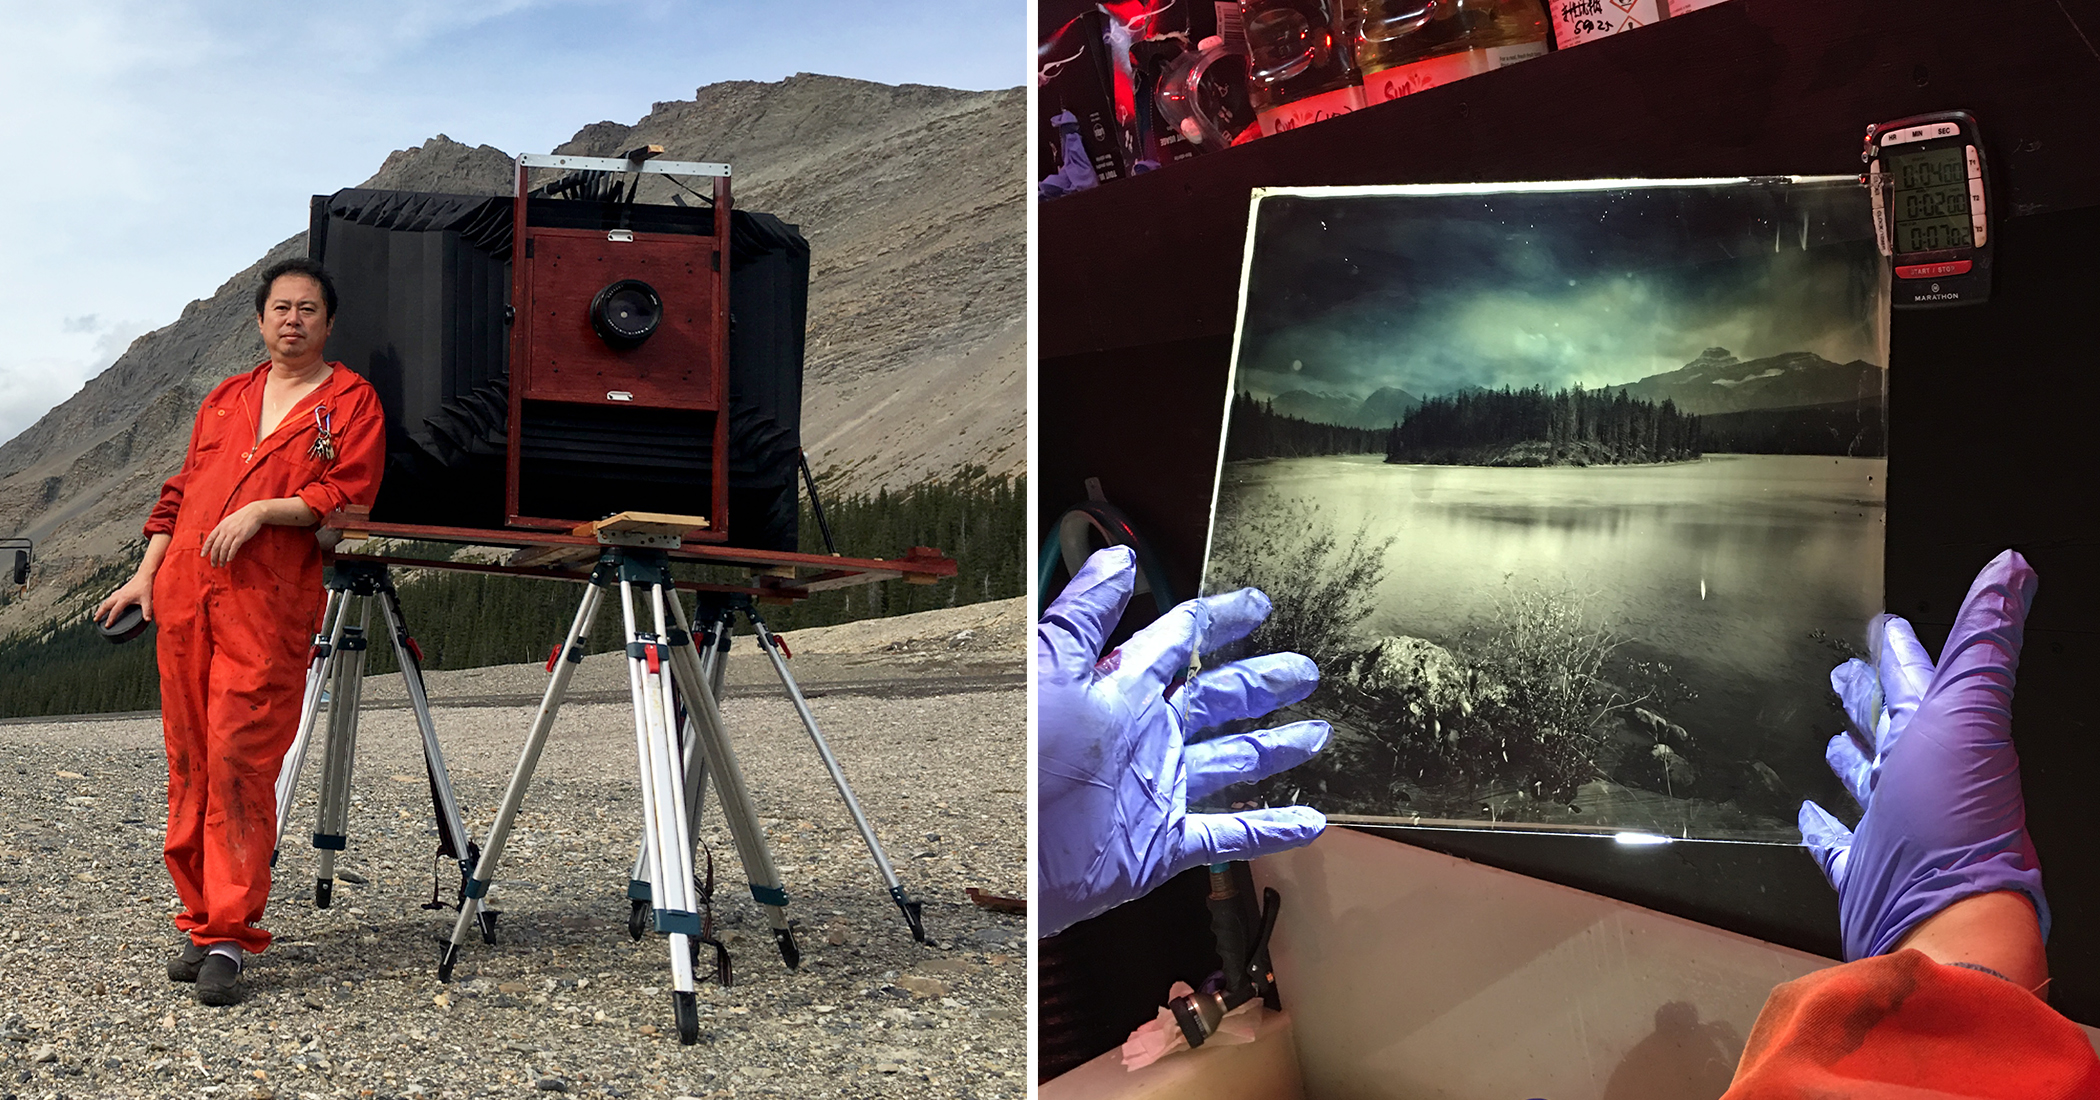 Man Builds Giant Wet Plate Camera and Darkroom on a Bus to Take His Hobby on the Road